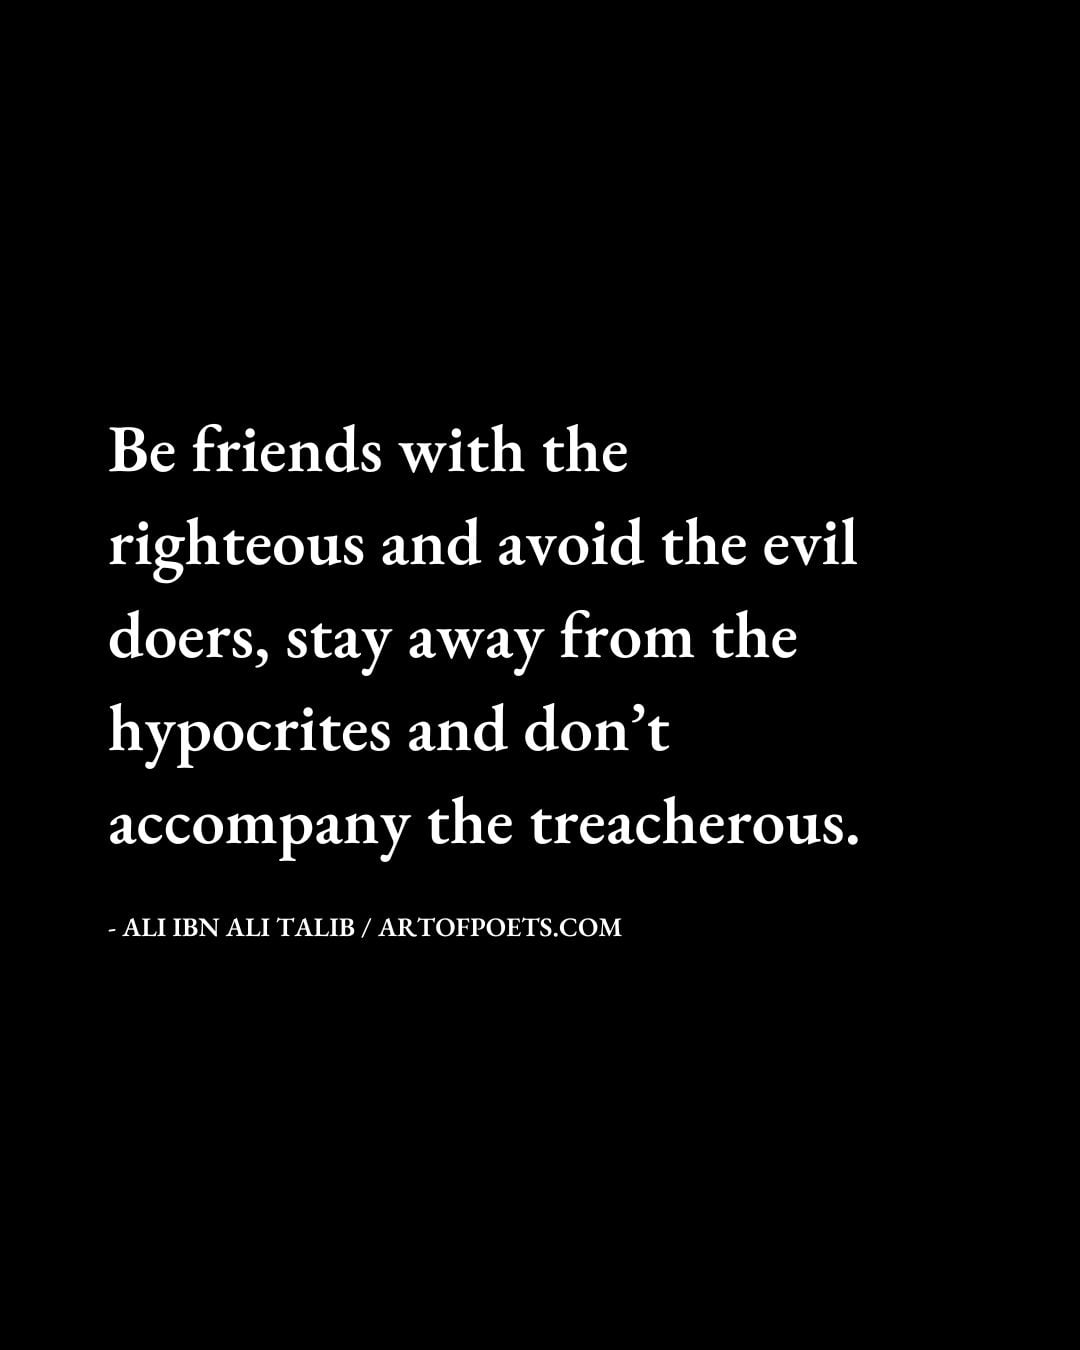 Be friends with the righteous and avoid the evil doers stay away from the hypocrites and dont accompany the treacherous